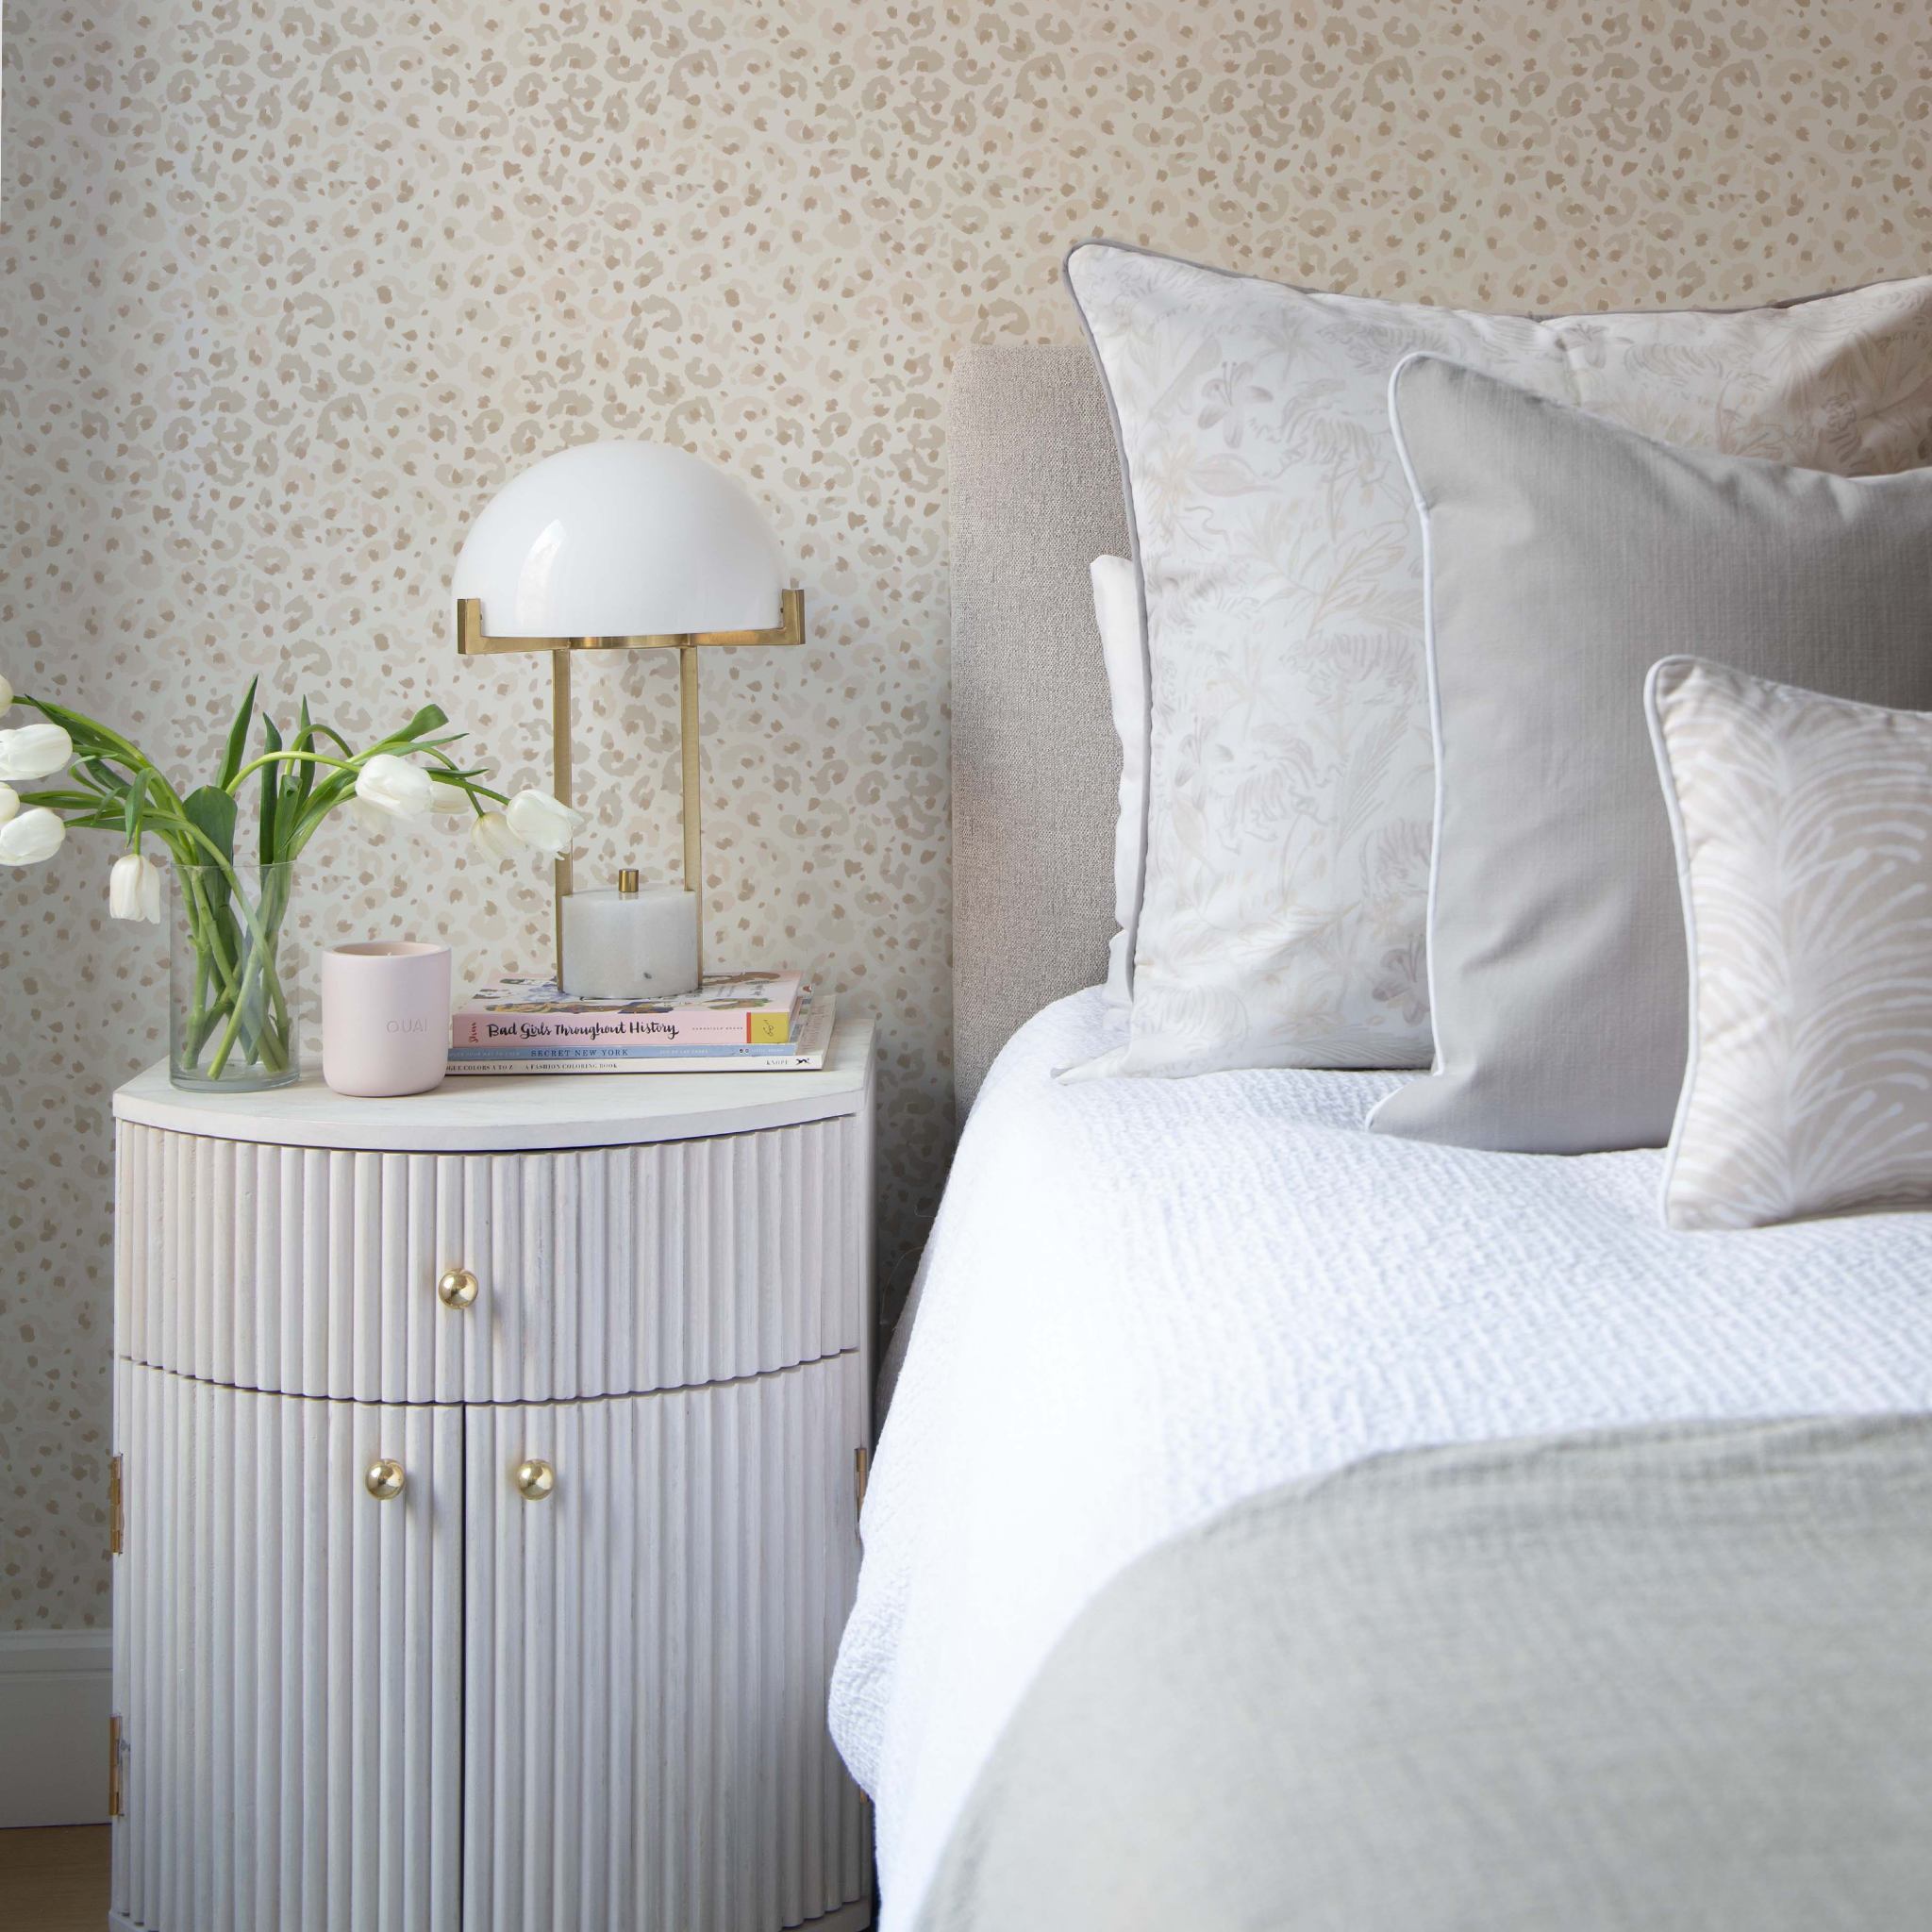 Bedroom corner styled with Beige Botanical Stripe Printed Wallpaper and Beige Chinoiserie Tiger Printed pillow, Linen Oat Pillow, and Beige Botanical Stripe Printed Lumbar next to white nightstand with white flowers and white lamp on top